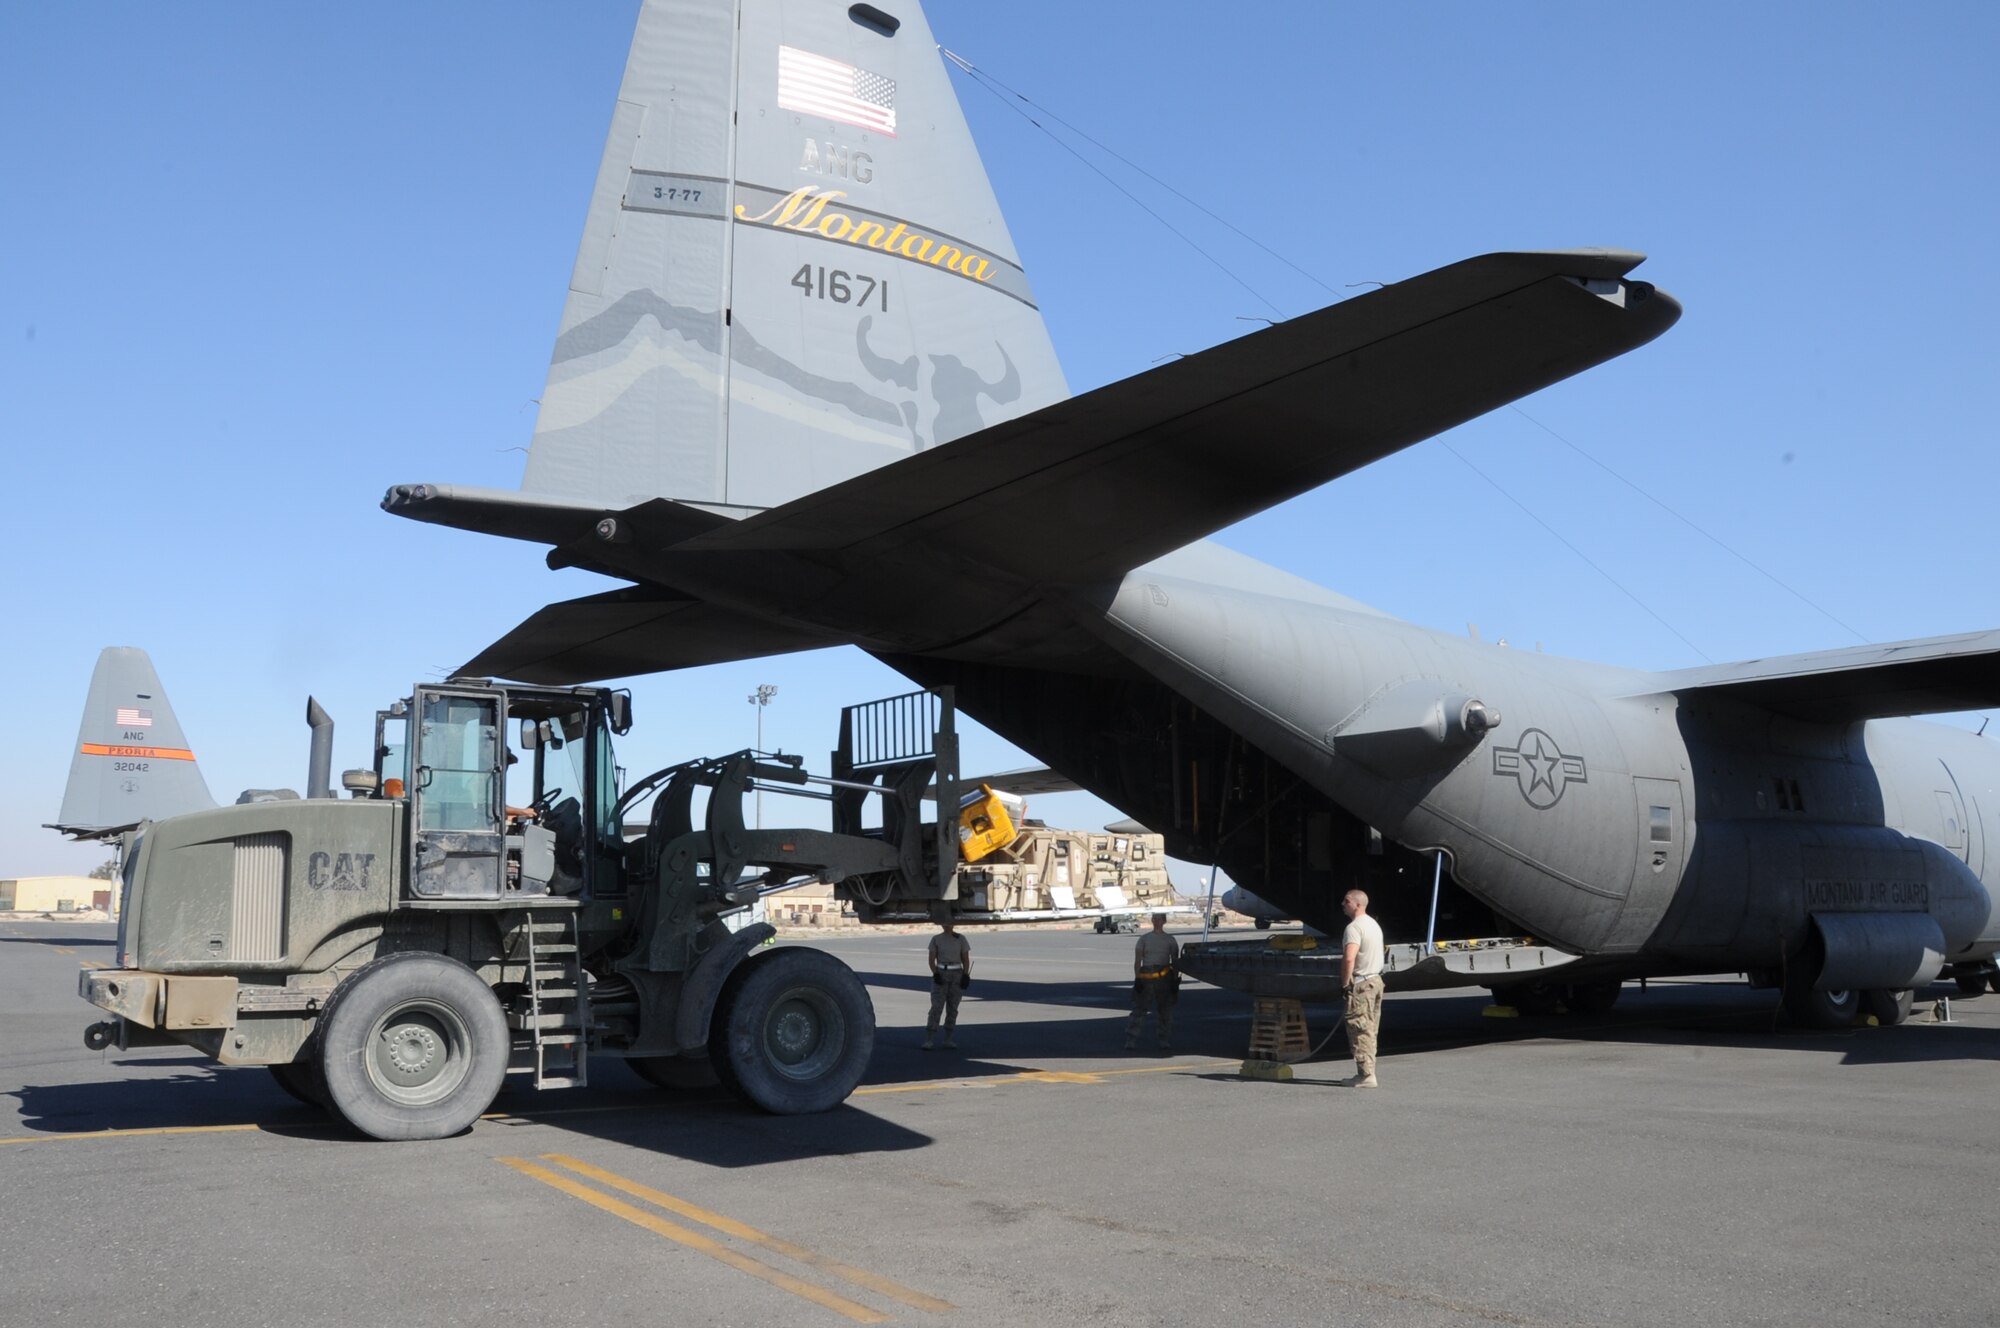 737th Expeditionary Airlift Squadron Airmen load a C-130H Hercules at an undisclosed location in Southwest Asia Feb. 8, 2017.  The mission of the 737th is to deliver personnel and cargo downrange in support of Operation Inherent Resolve. (U.S. Air Force photo/Tech. Sgt. Kenneth McCann)